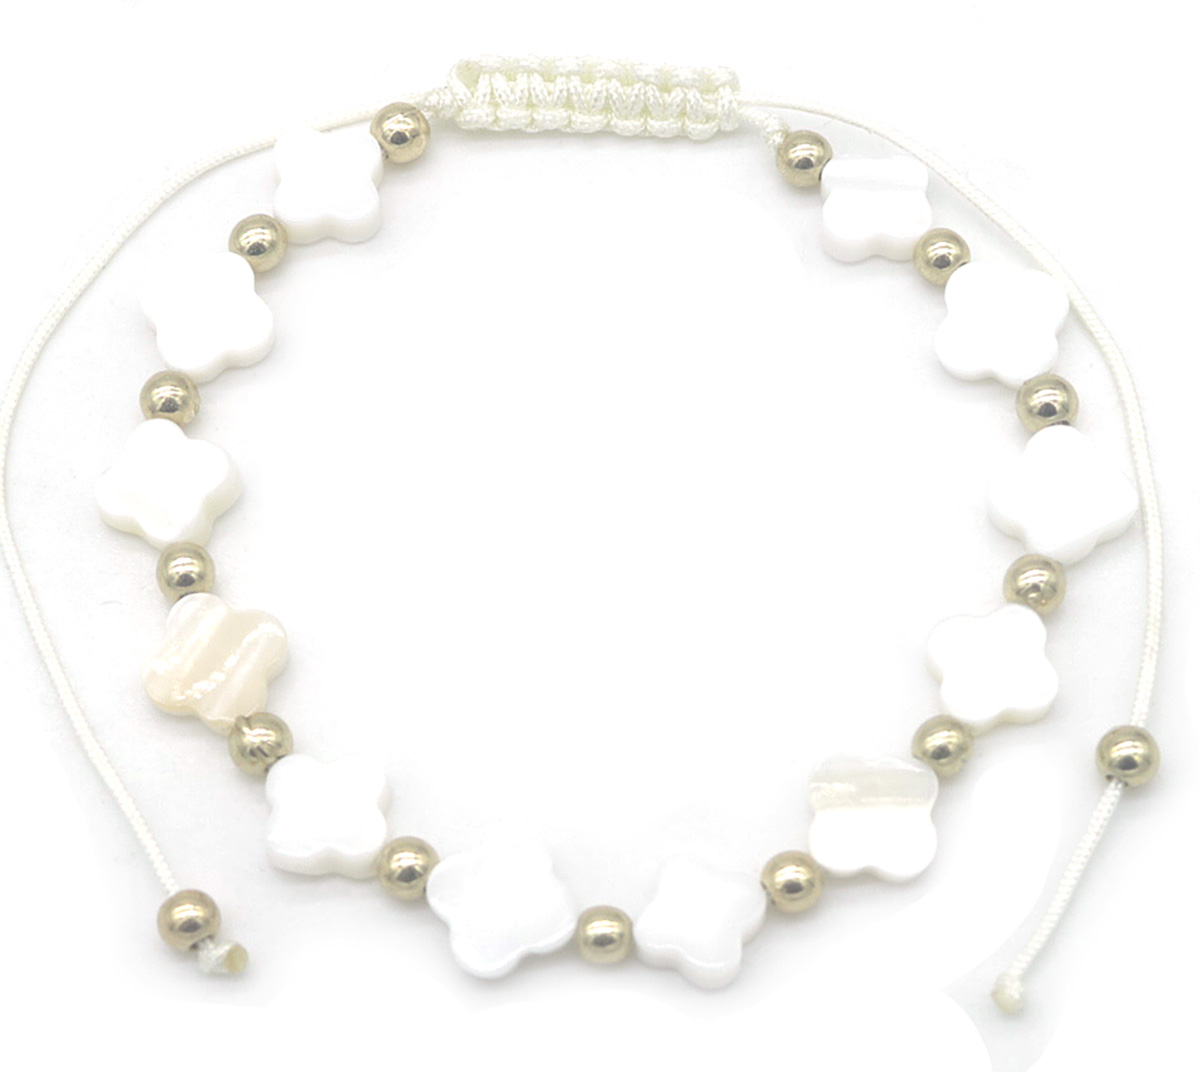 I-C23.1 ANK830-093  Anklet Shell Clovers